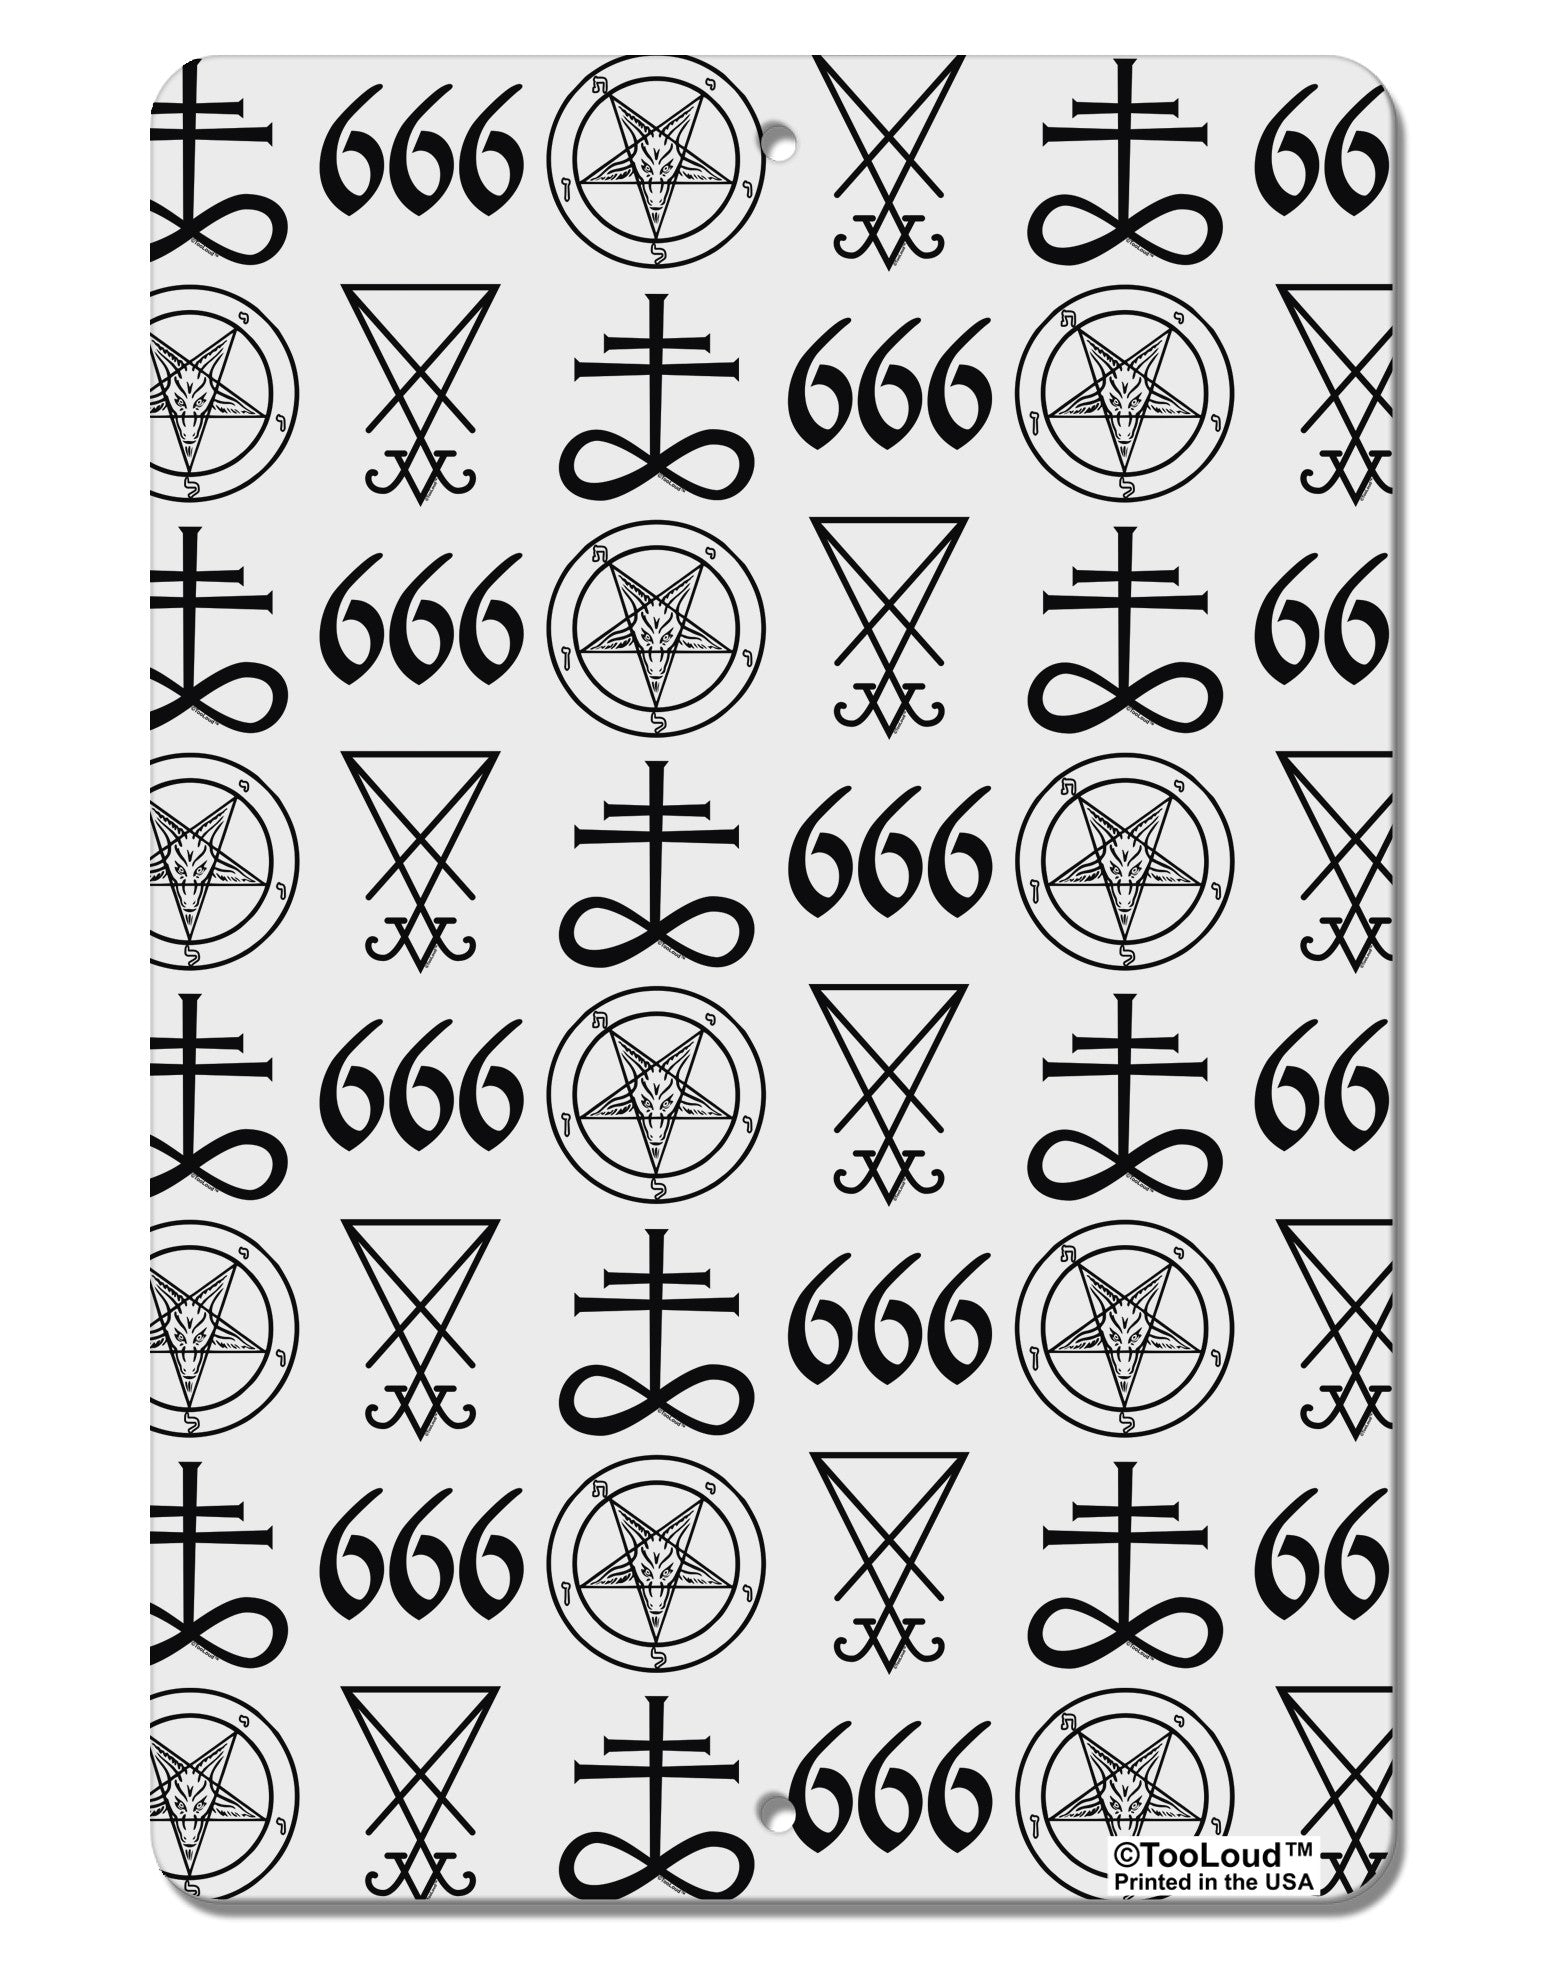 demonic symbols and their meanings